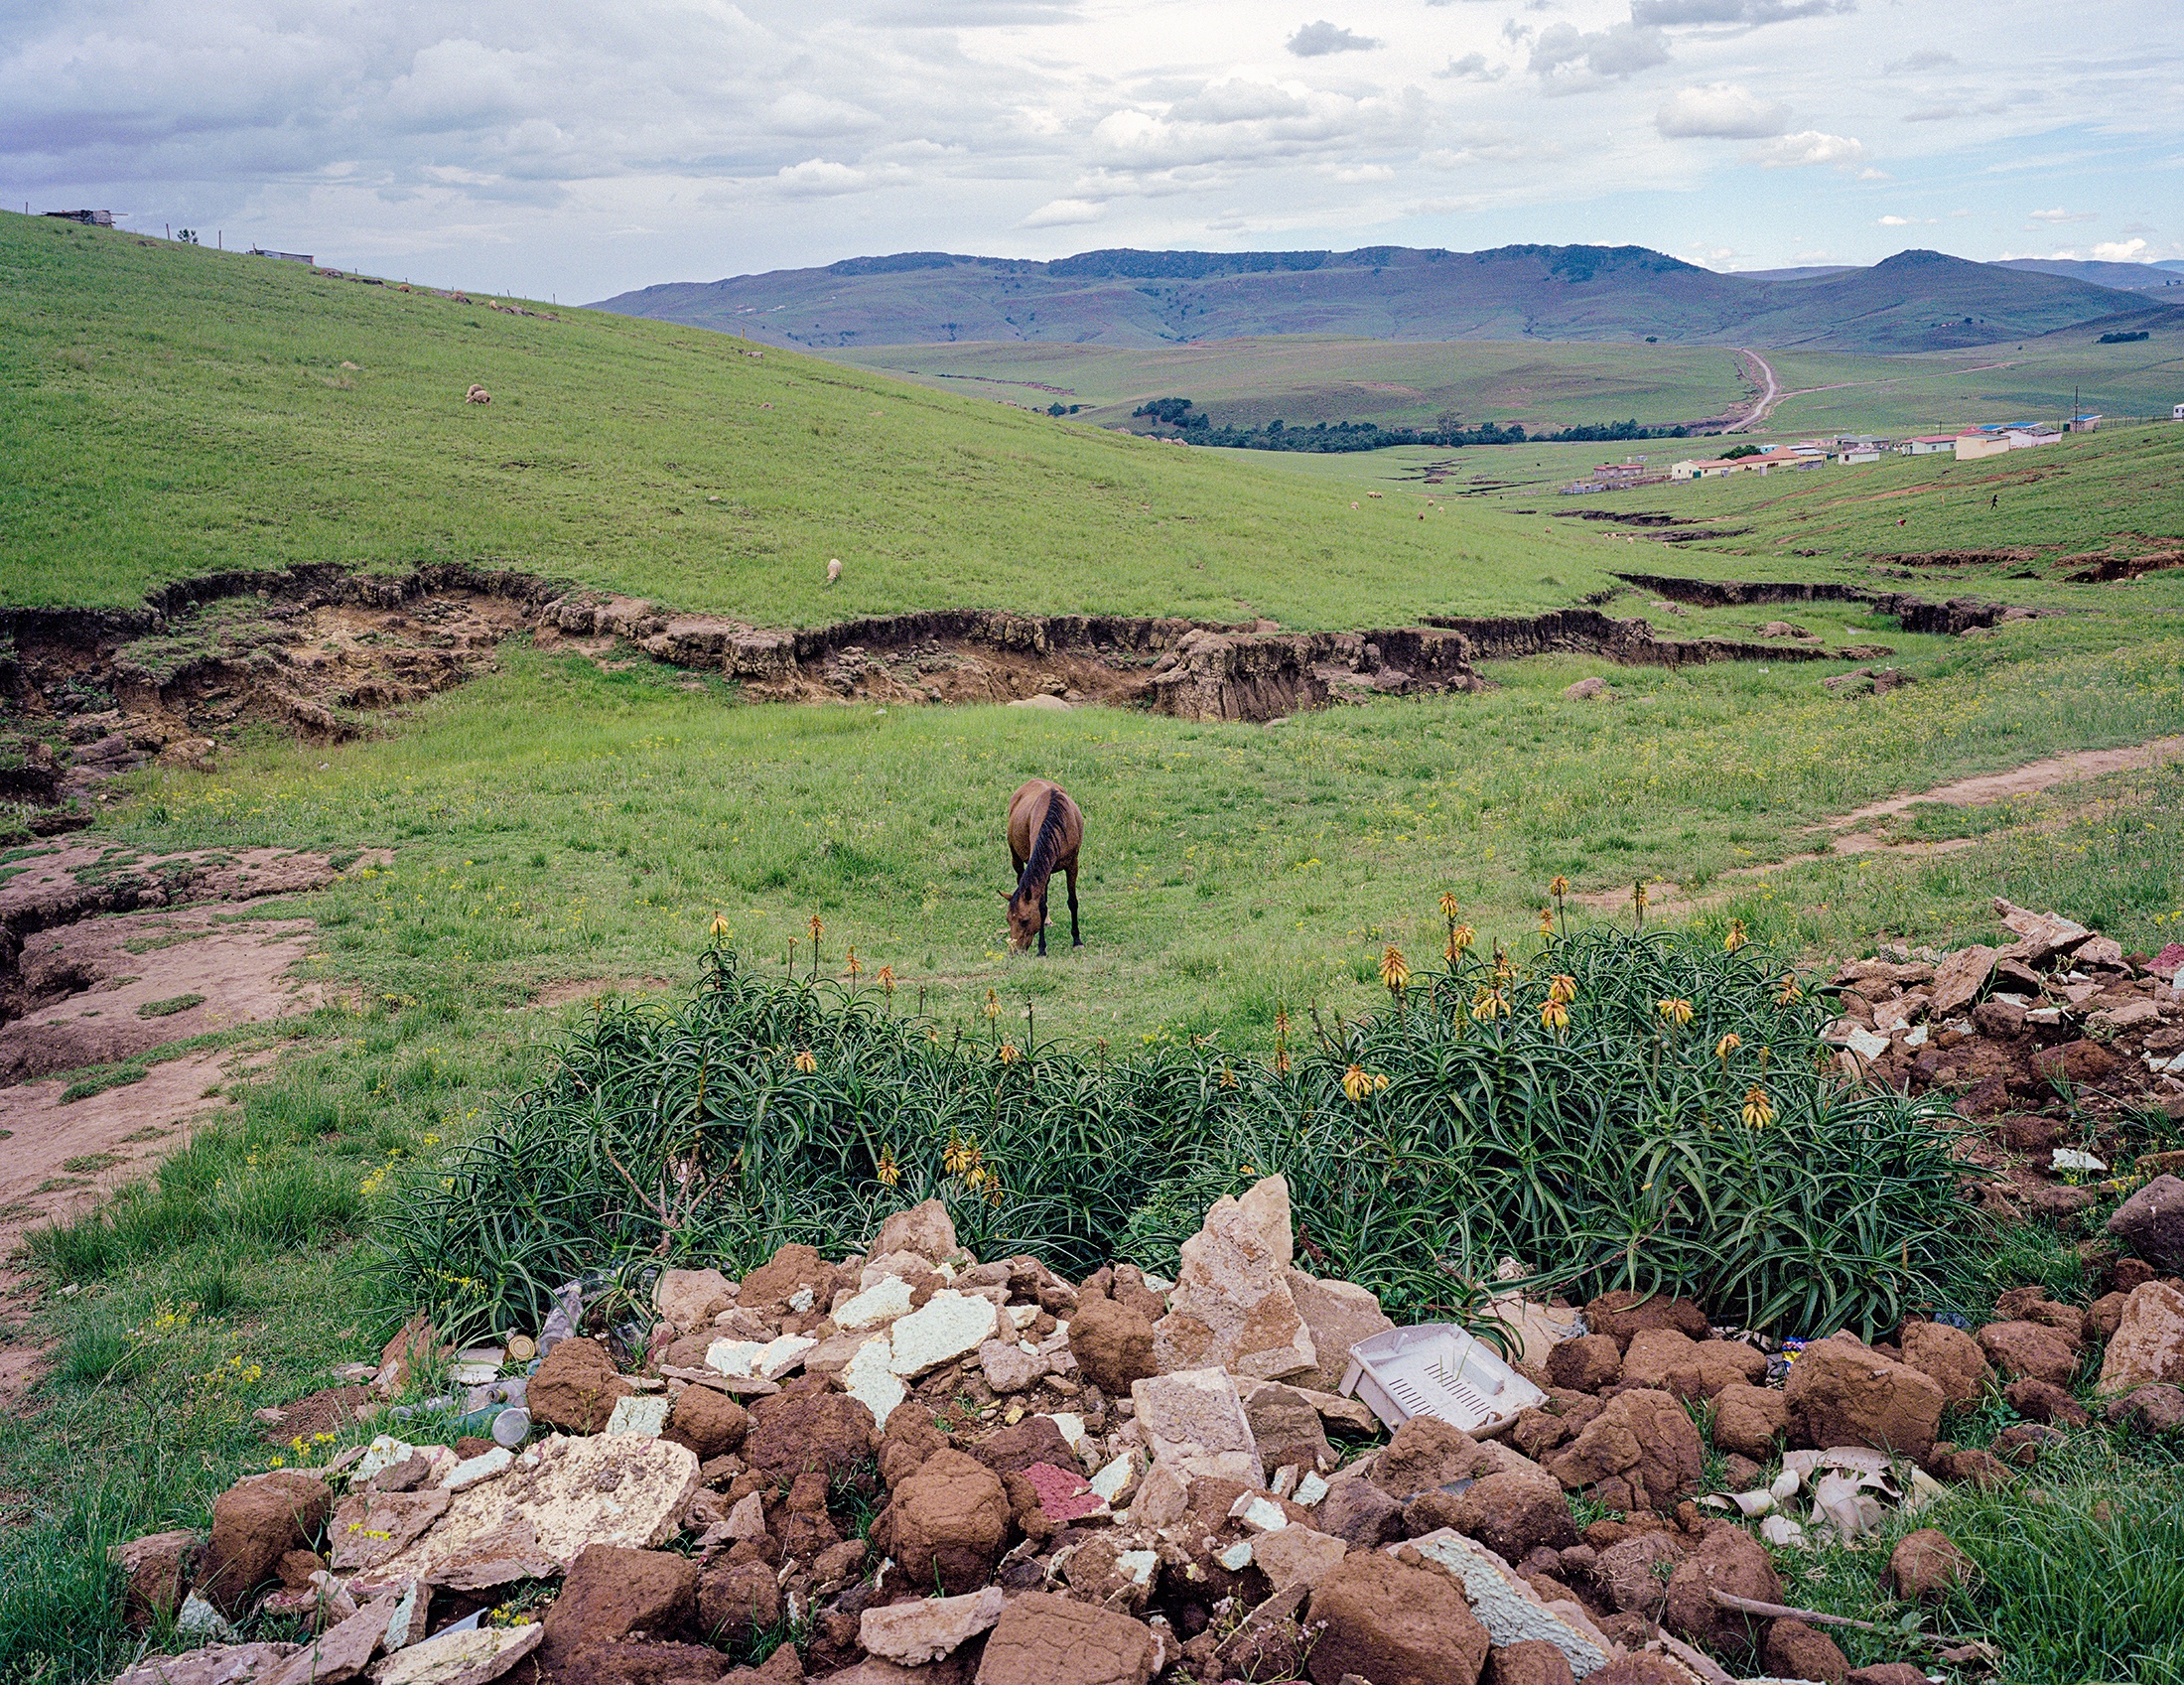 Lindokuhle Sobekwa's photograph 'eMtyamde' shows a horse eating grass in a plain, with pile of stones at the front.
